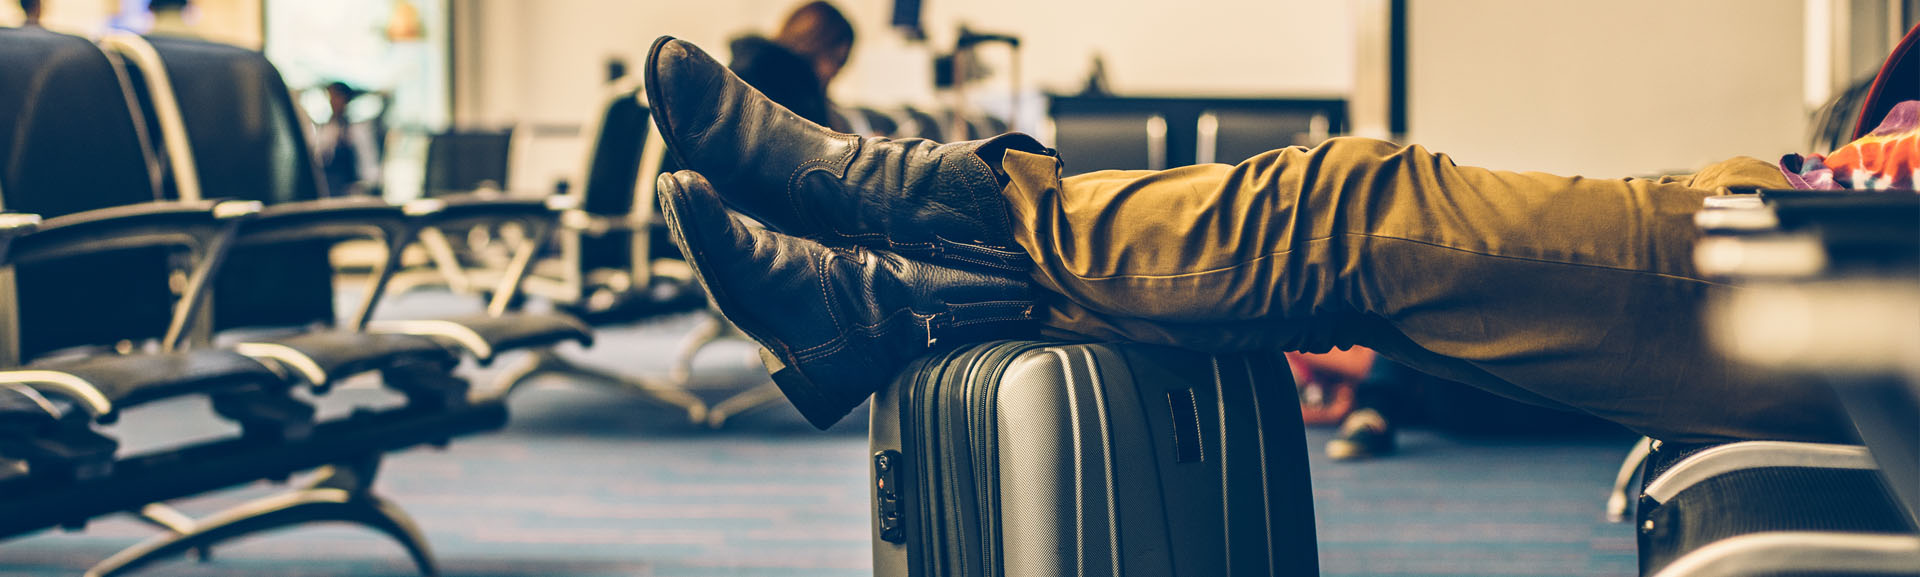 Men's feet resting on his suitcase while he is waiting for his delayed flight